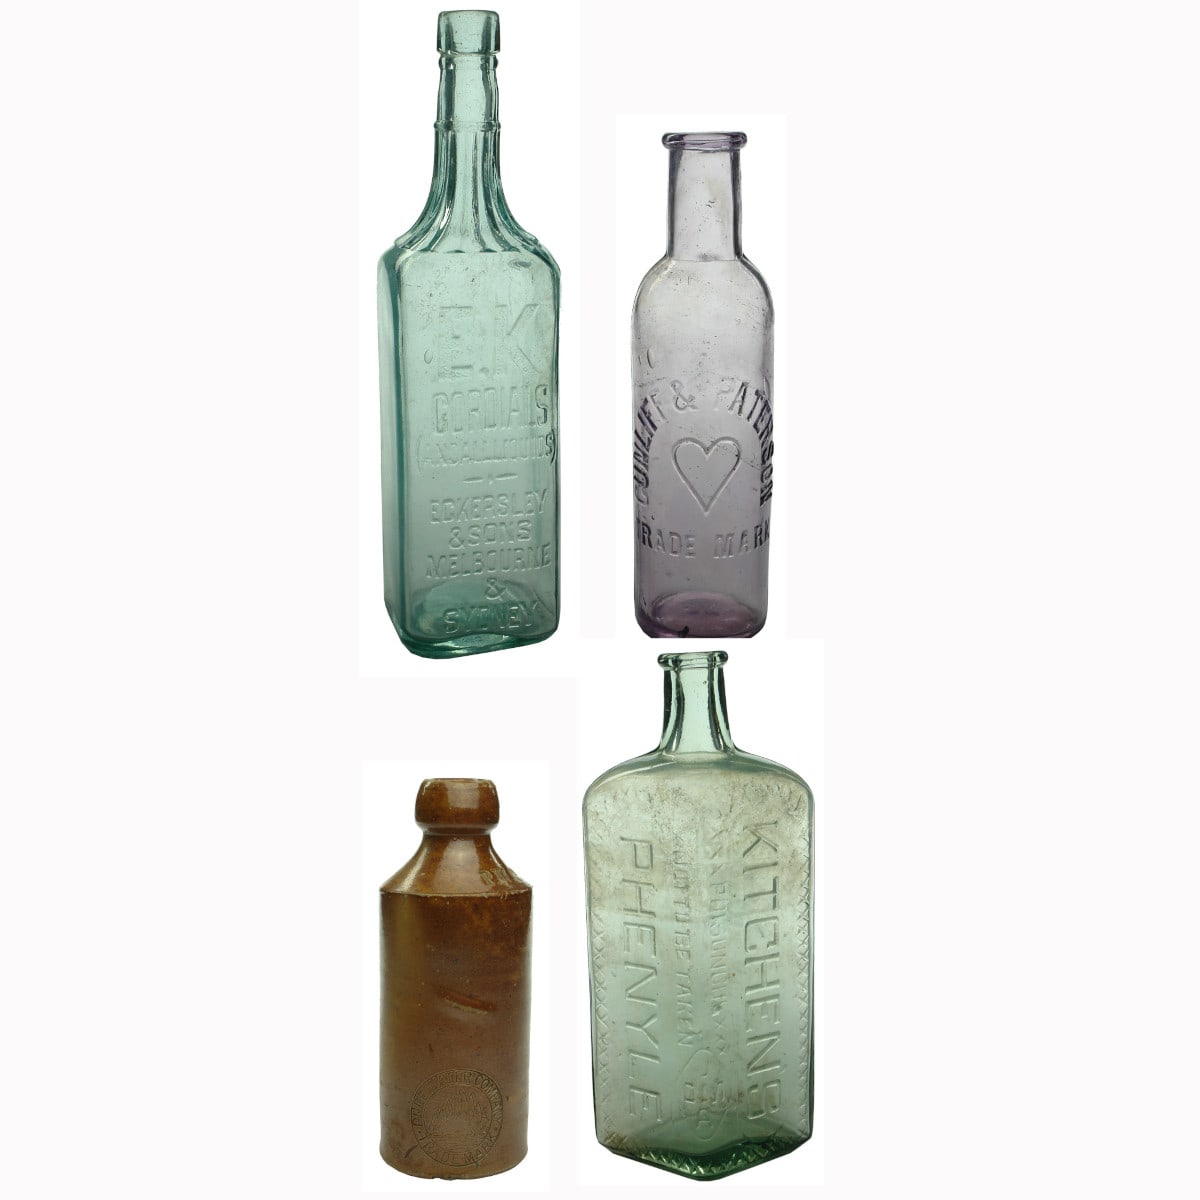 Four Bottles: EK Cordial; Cunliff & Paterson Chutney; Pure Water Company Ginger Beer; Kitchen's Phenyle.